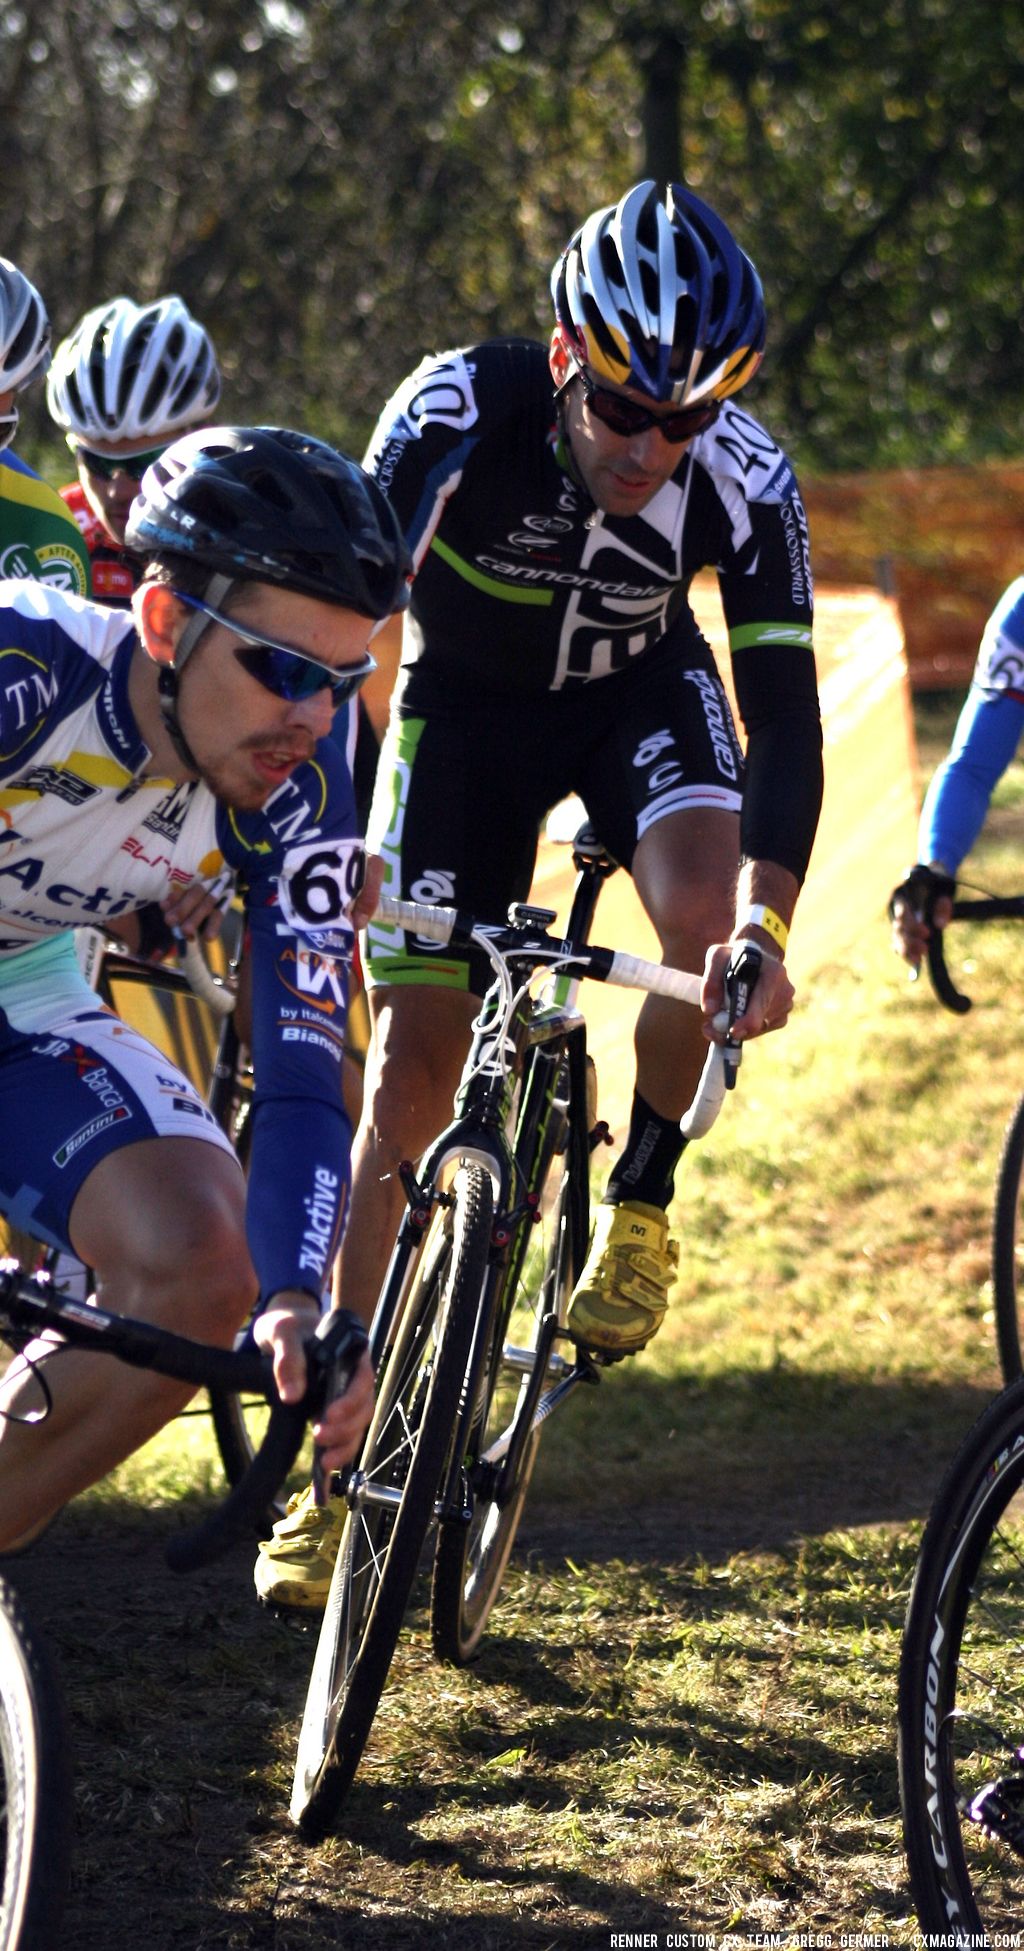 Tim Johnson also was obstructed at the start and had to chase the first lap. © Renner Custom CX Team, Gregg Germer